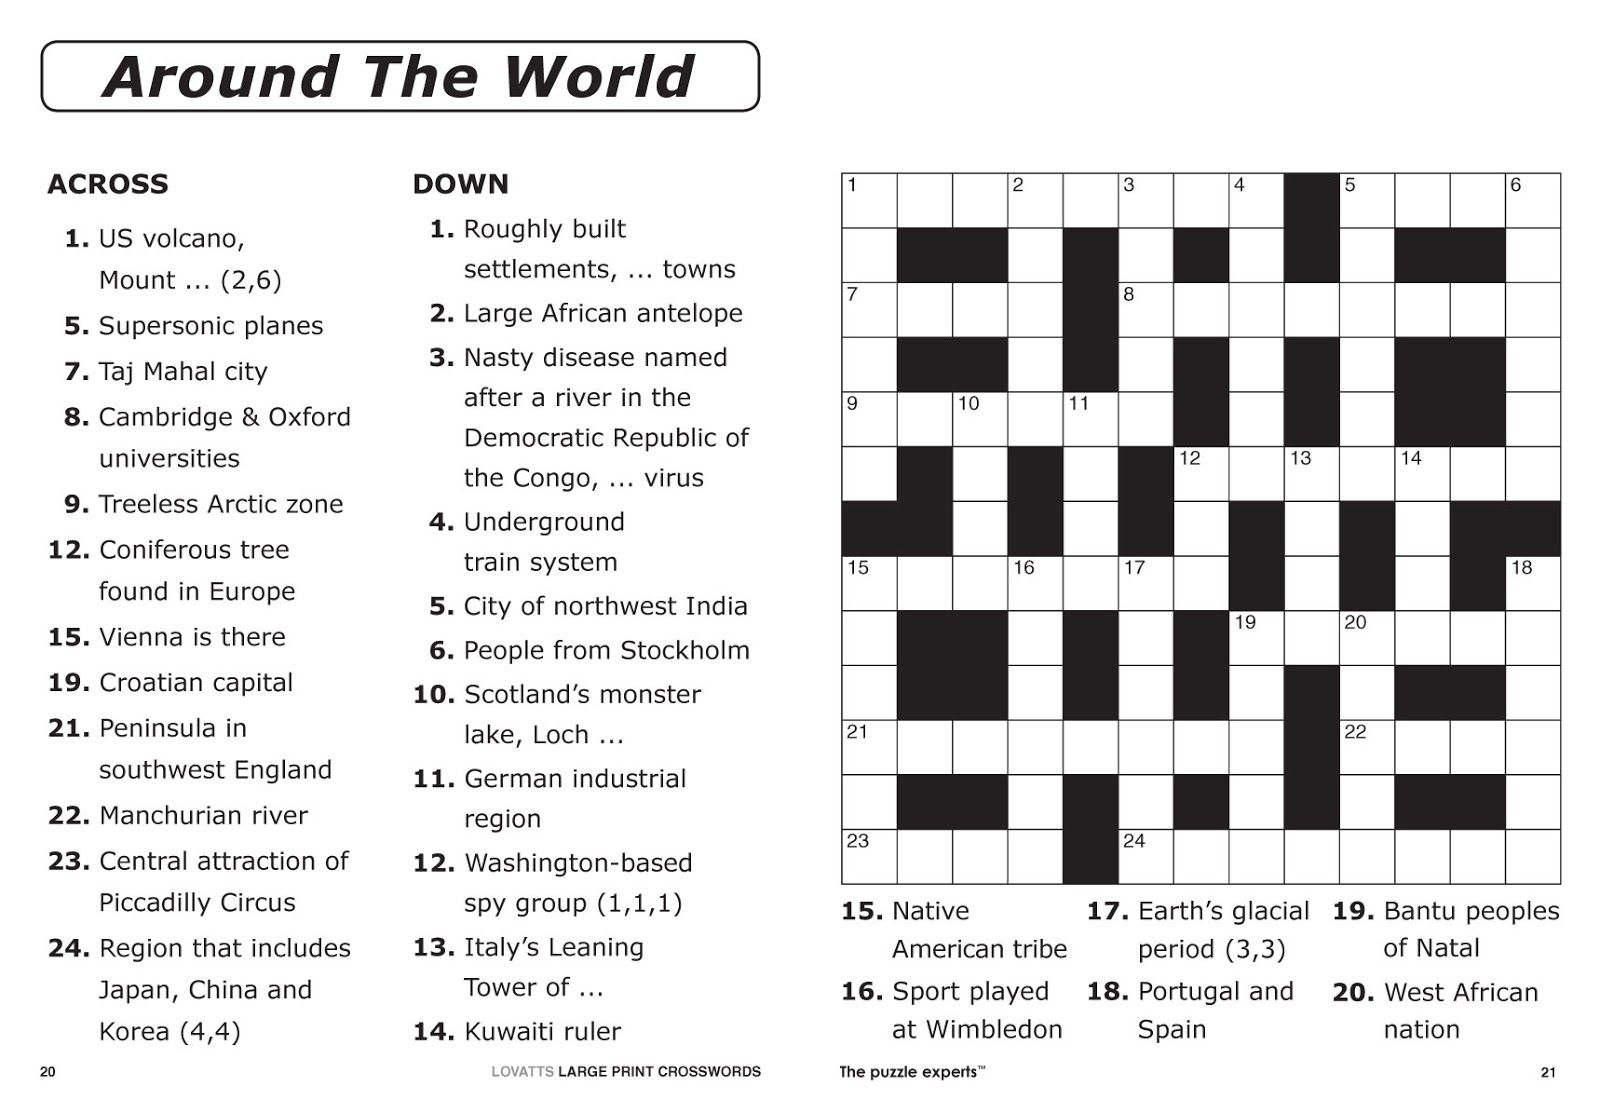 Free Printable Large Print Crossword Puzzles | M3U8 - Printable Puzzles For 15 Year Olds